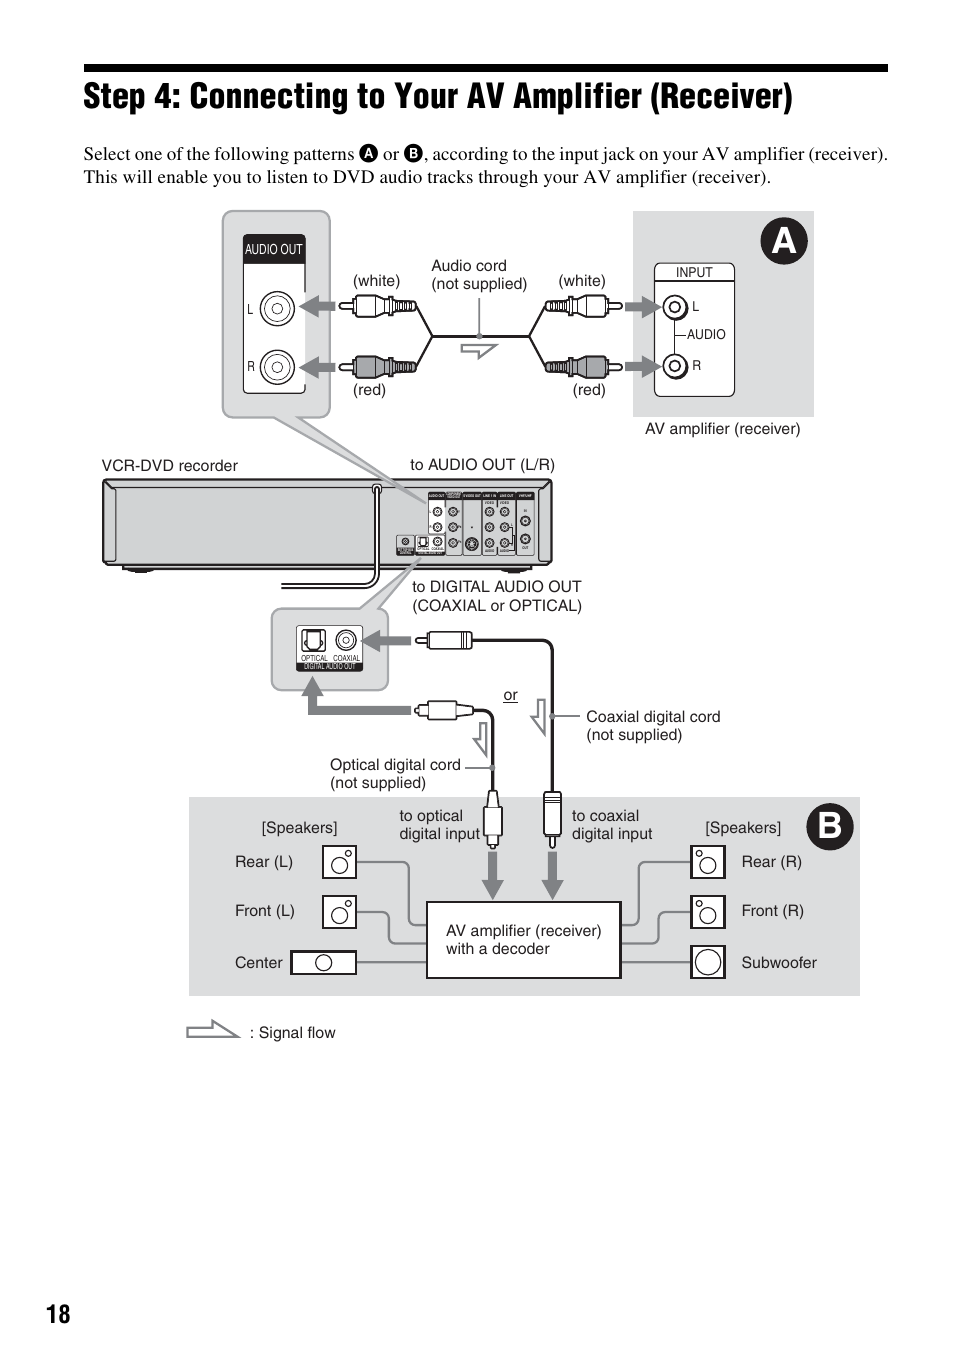 Step 4: connecting to your av amplifier (receiver) | Sony RDR-VX521 User Manual | Page 18 / 132